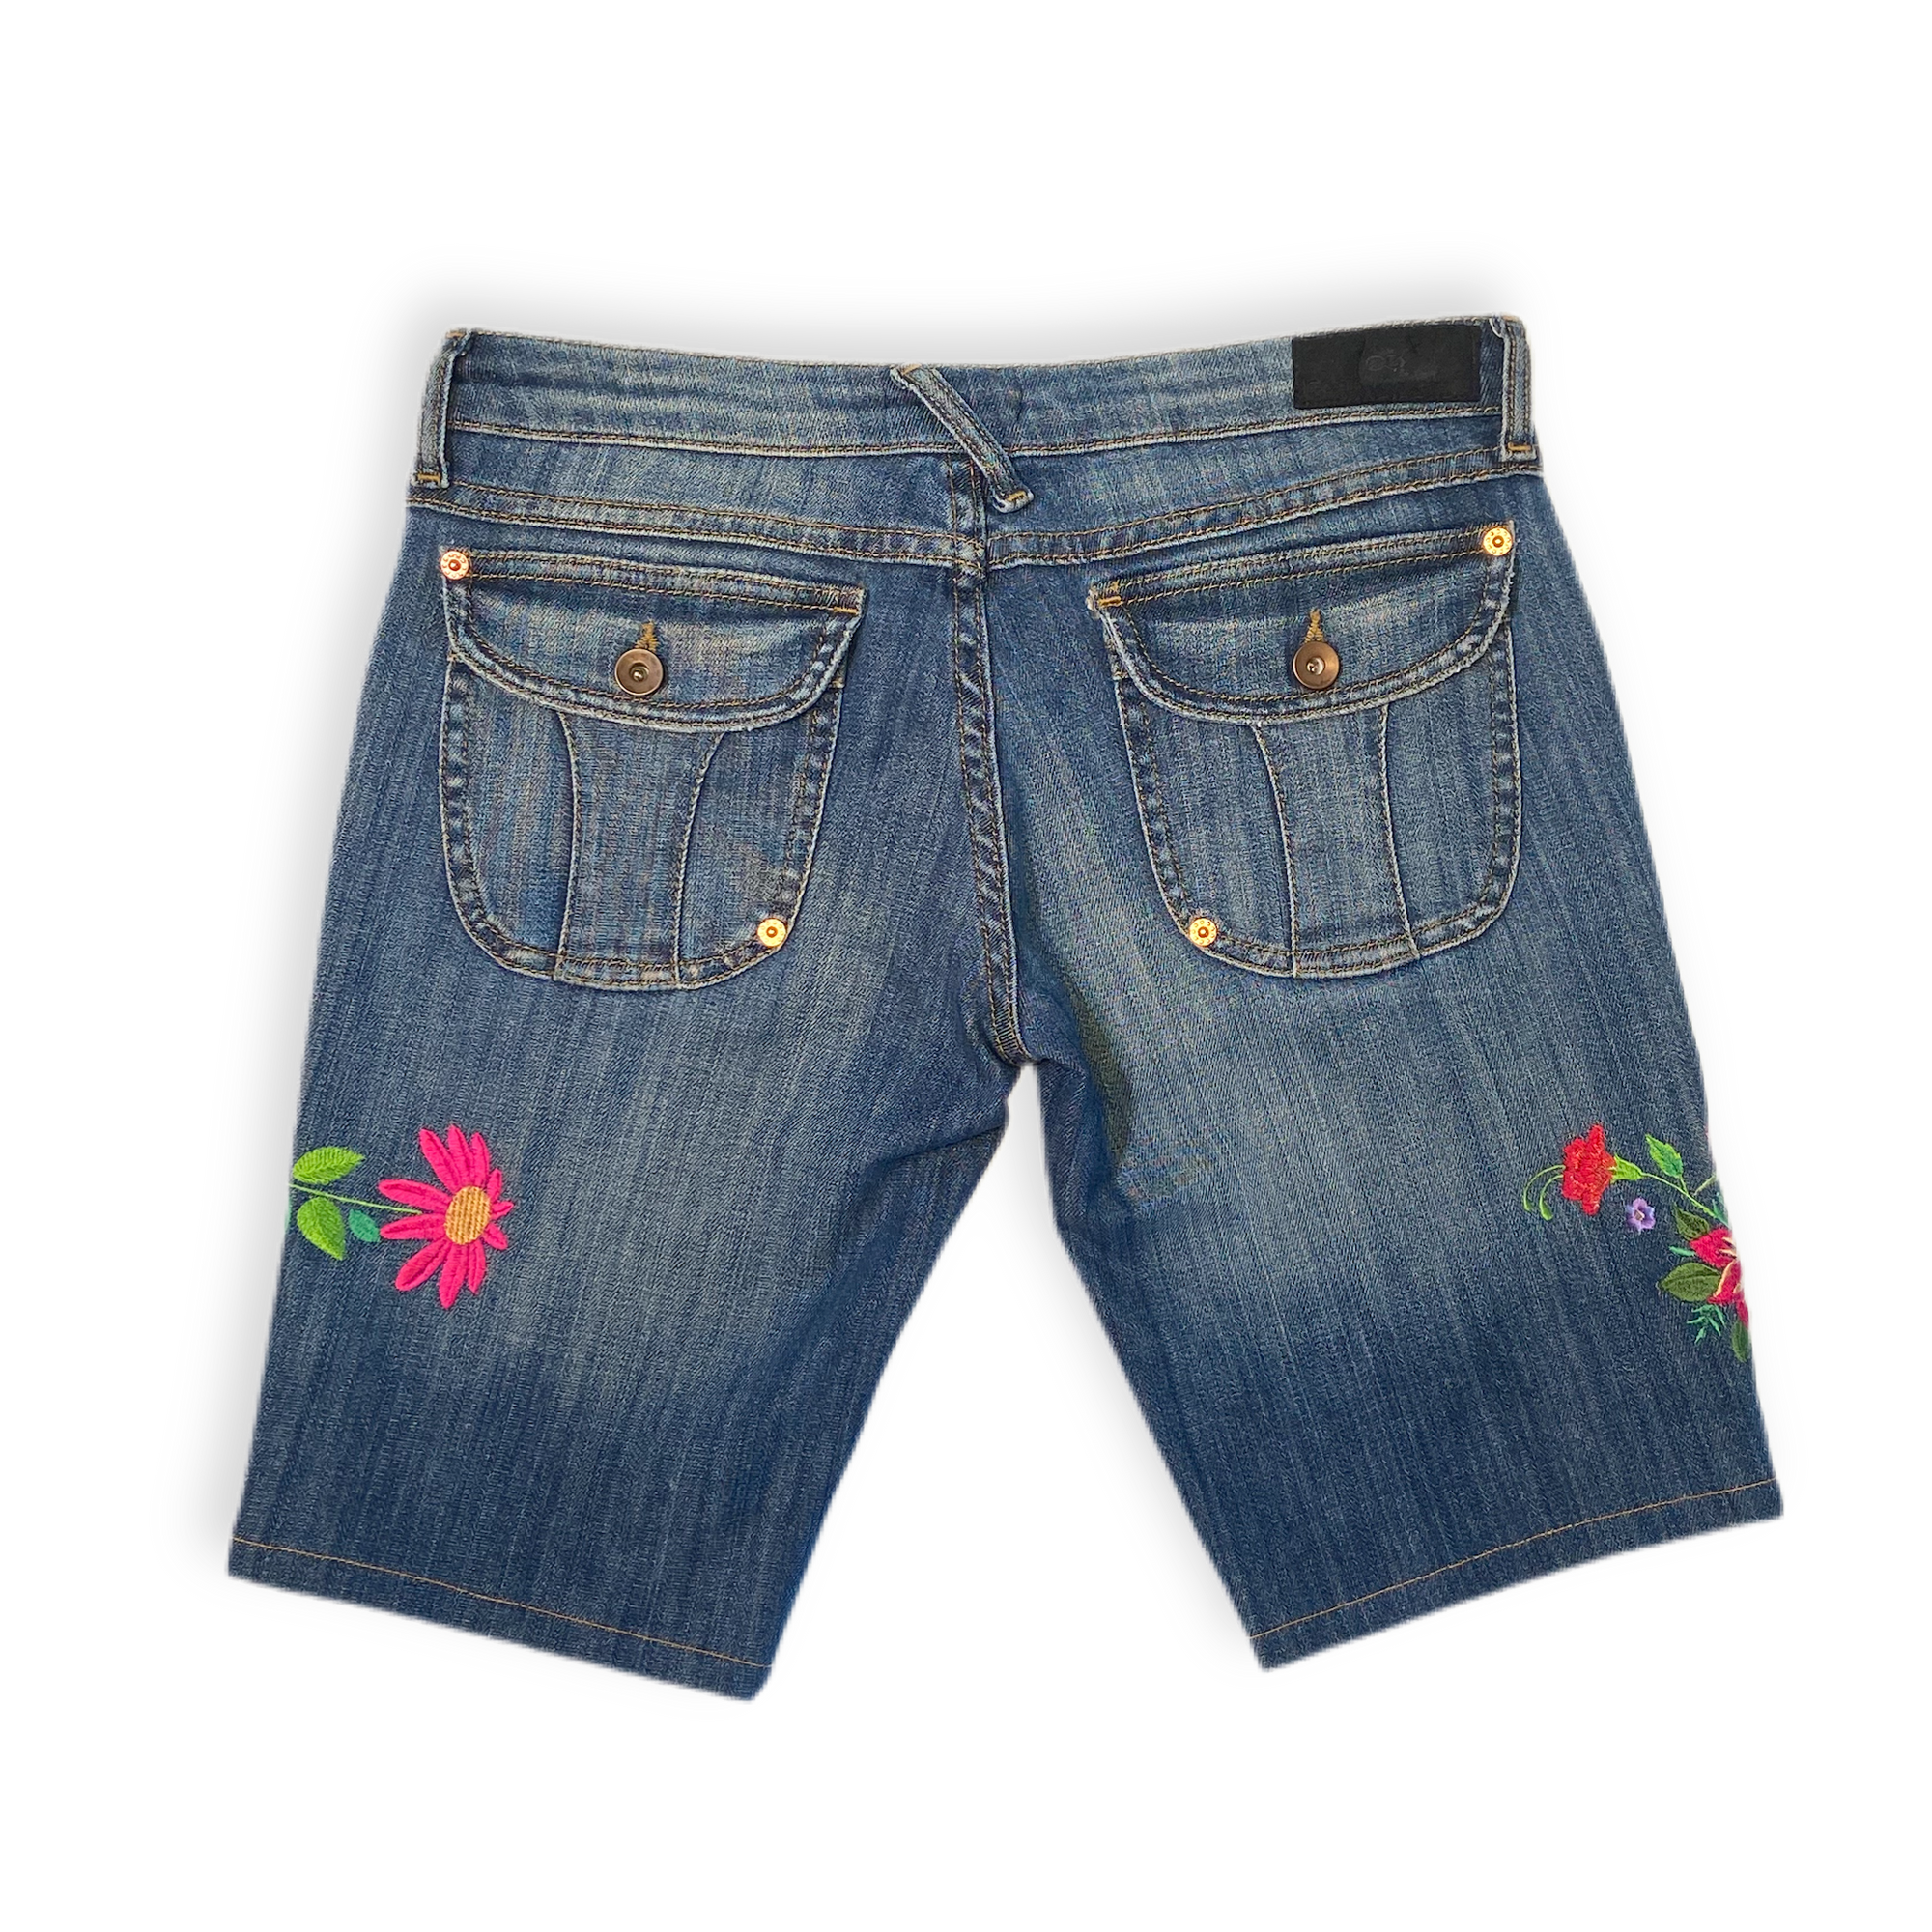 Shorts "Butterfly & Flowers"